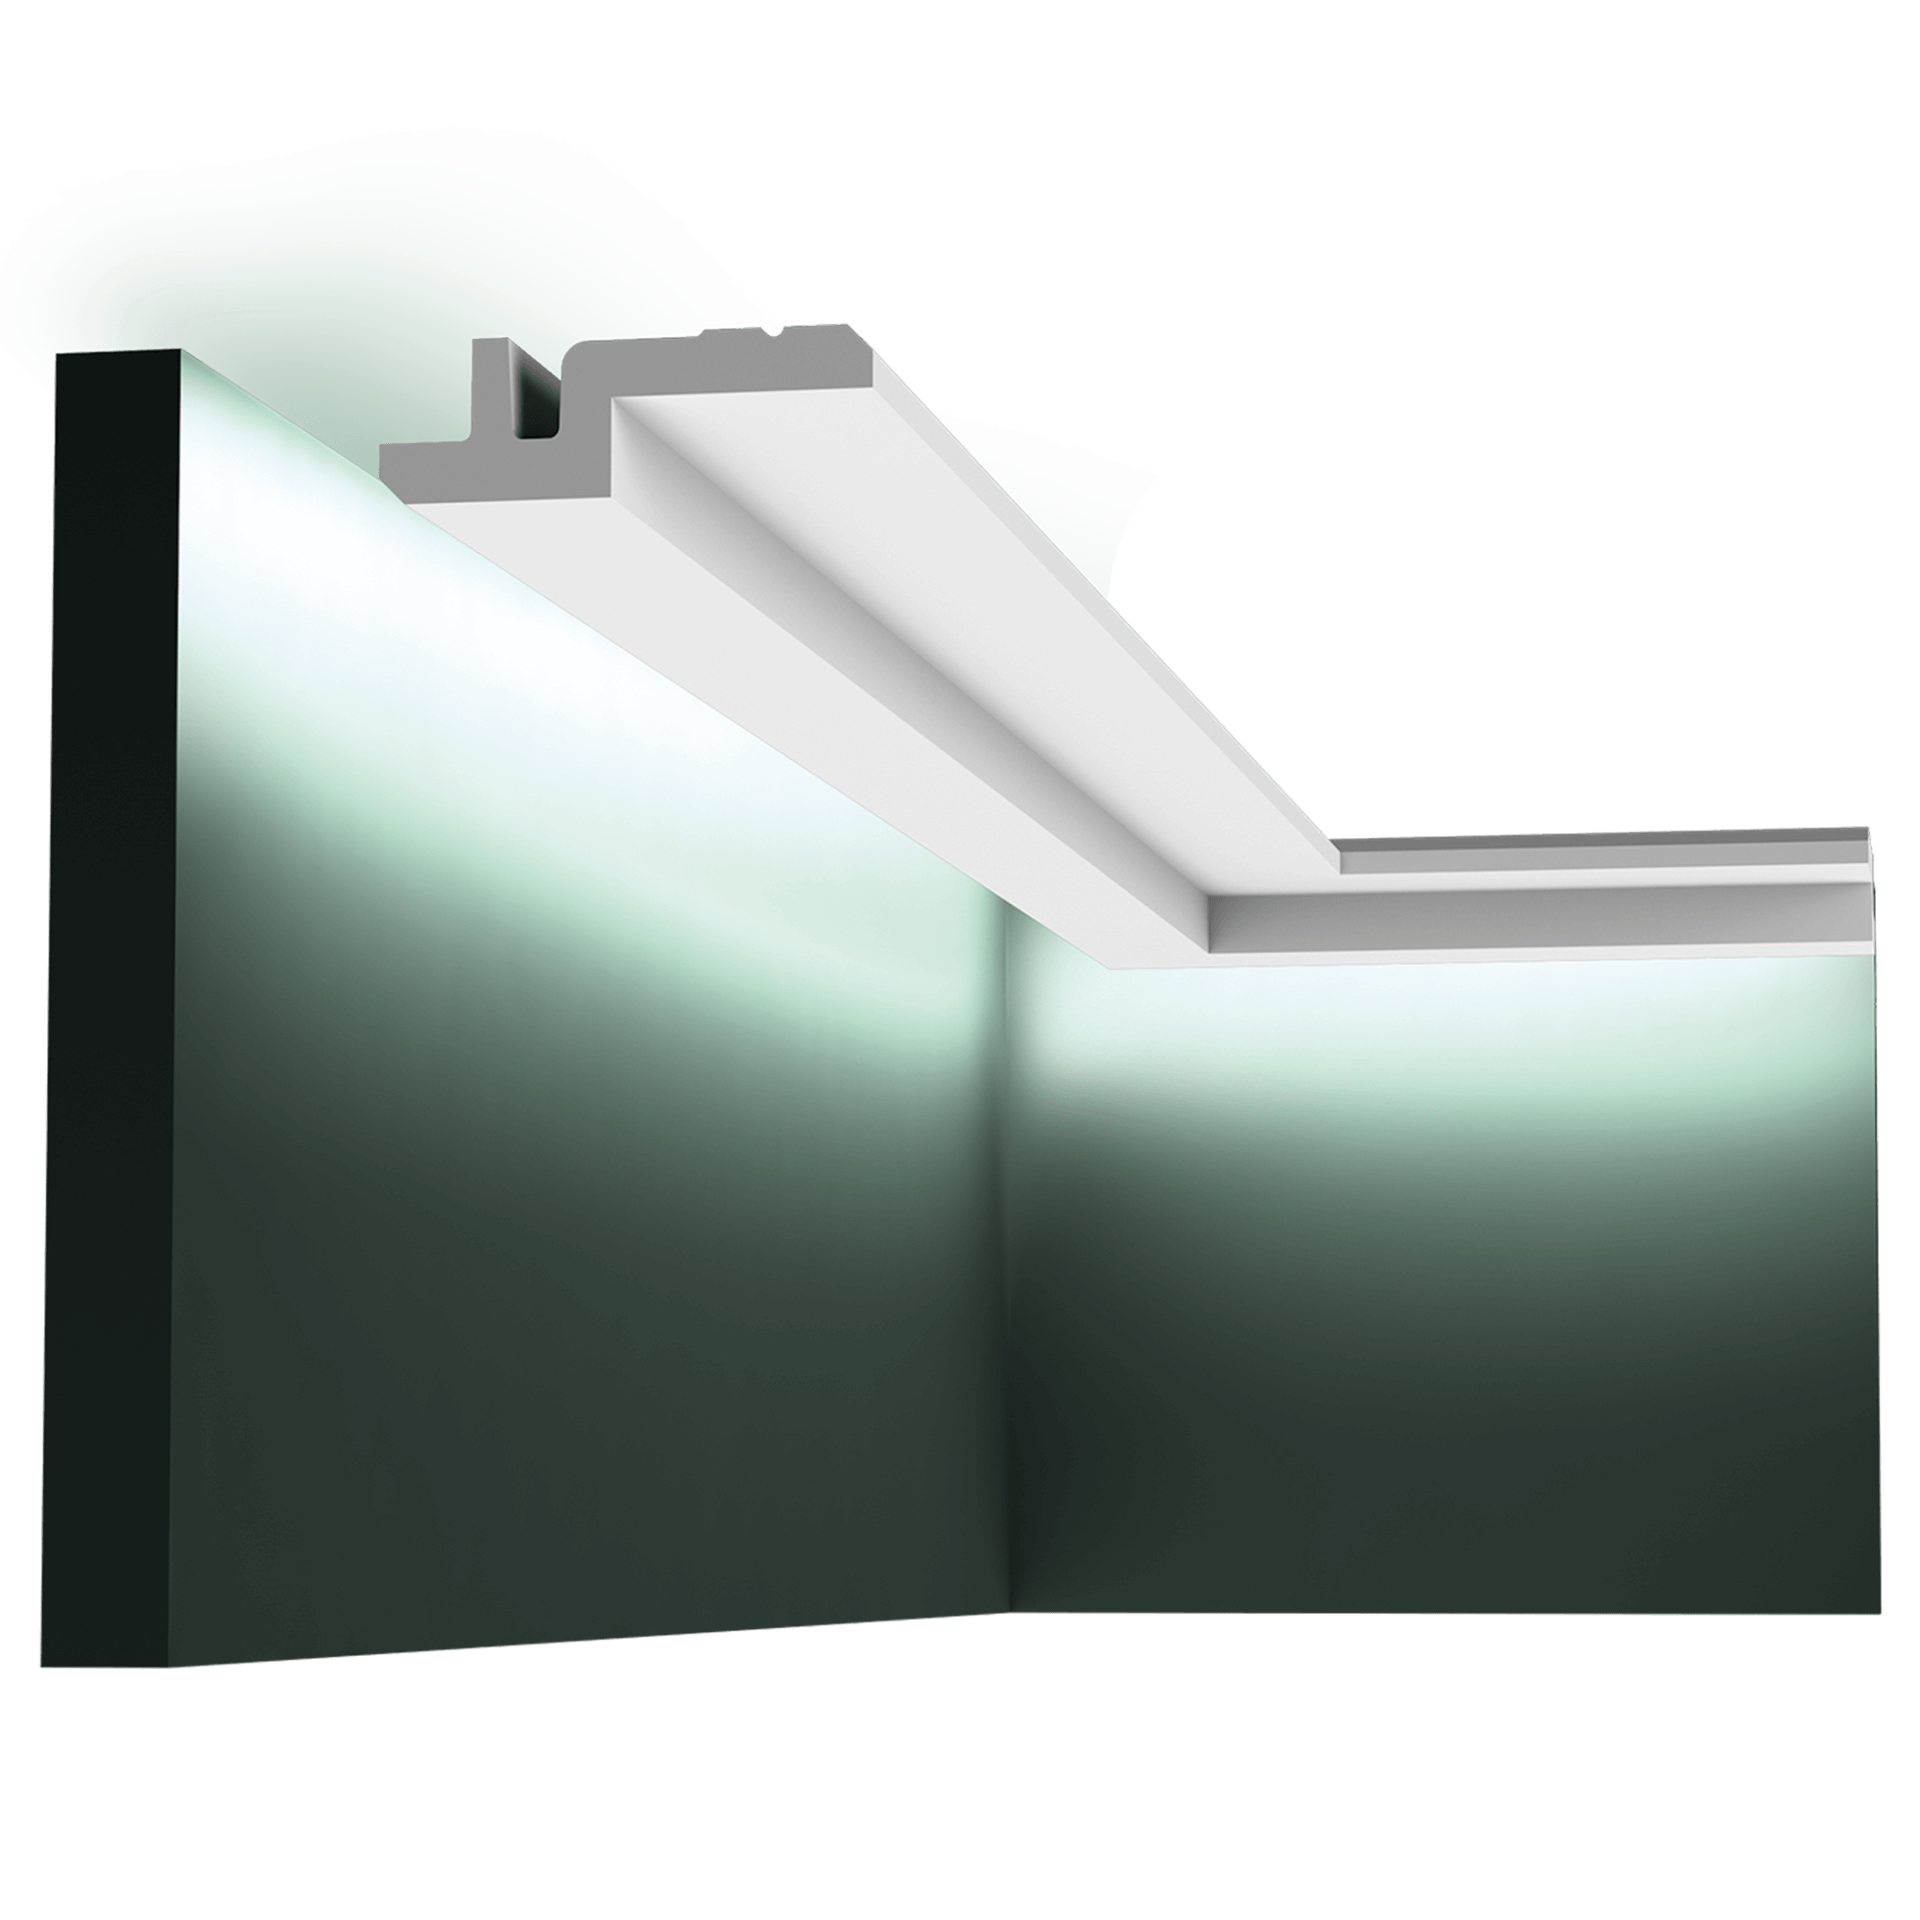 c394 downlighter e5a3 This clean, modern profile from the Steps range can also be used to conceal LED lighting. The angled corners above and below provide additional subtle shadow lines. Designed by Orio Tonini.